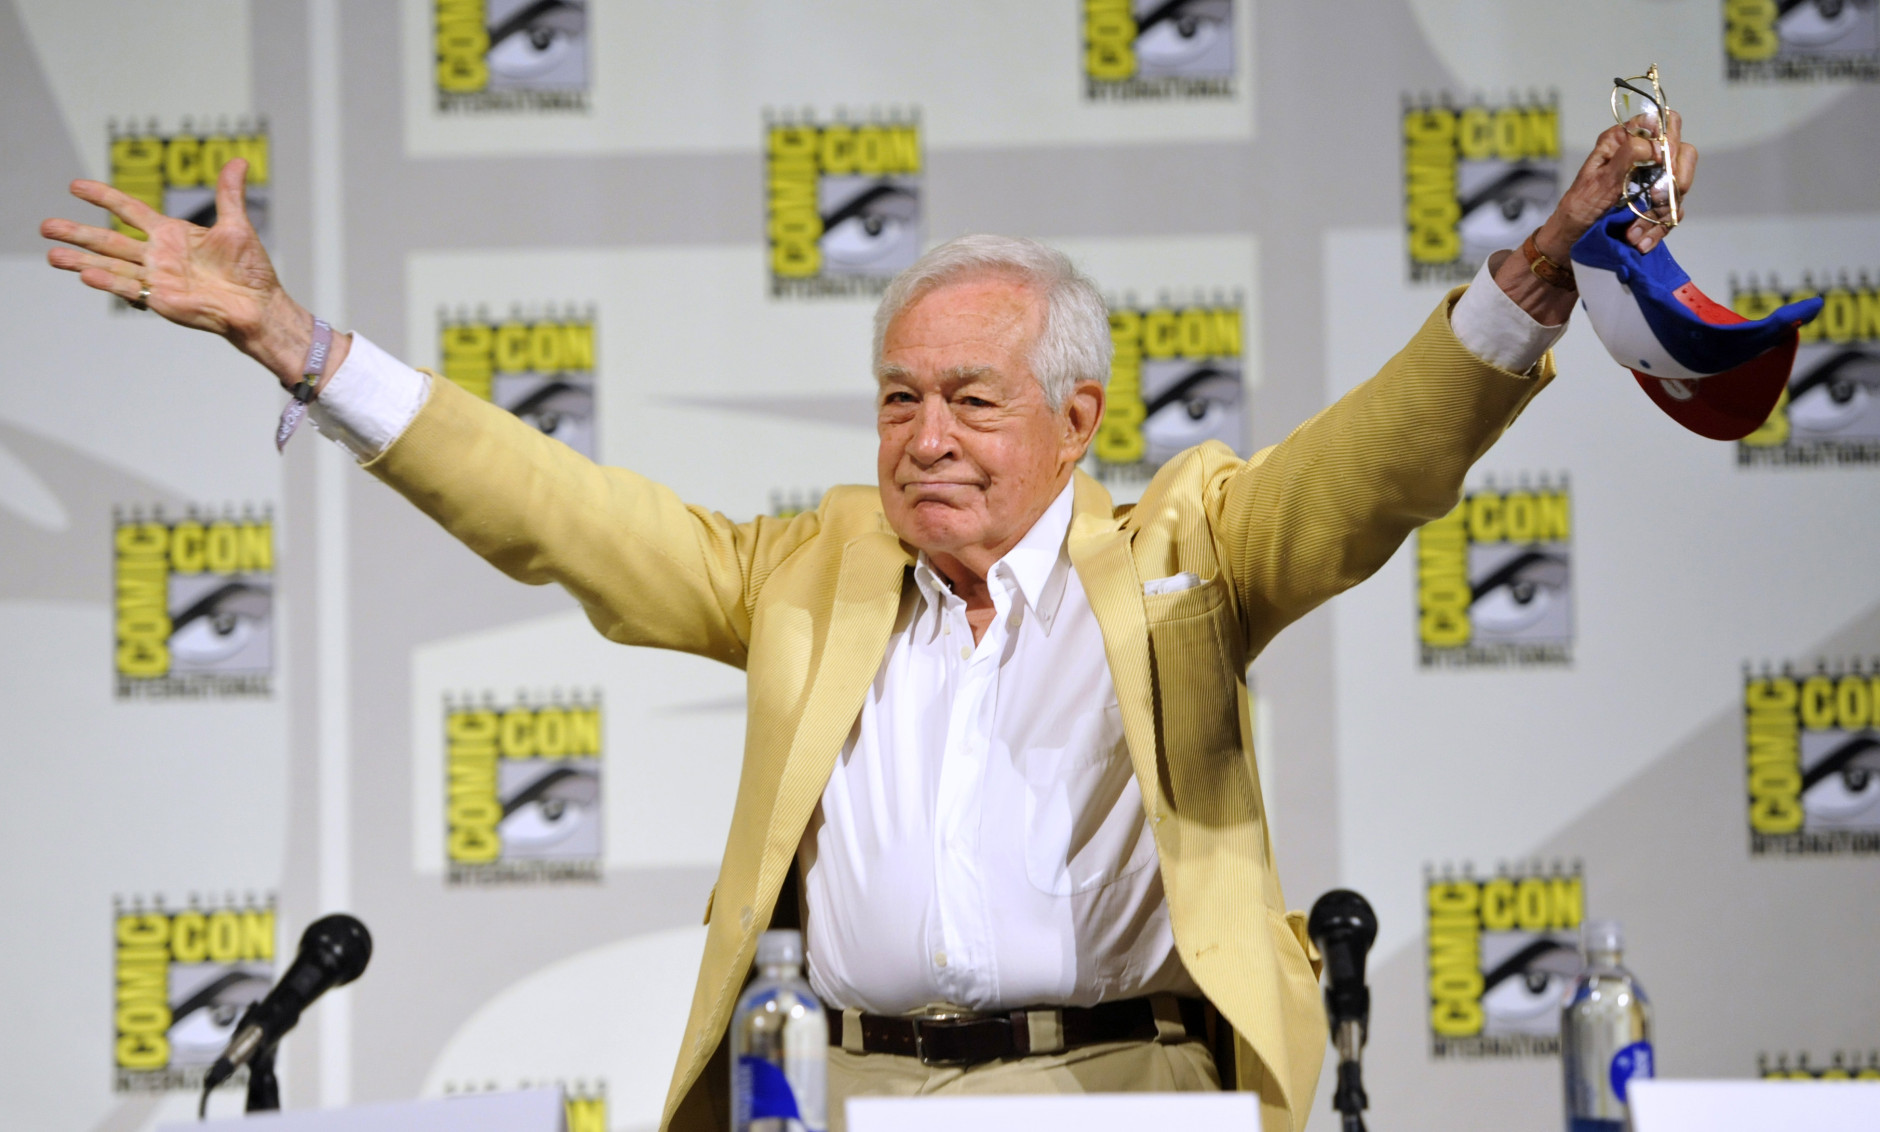 Jack Larson, who played Jimmy Olsen in the 1950's TV series, "The Adventures of Superman, attends the "Superman" 75th Anniversary panel on Day 4 of the Comic-Con International on Saturday, July 20, 2013 in San Diego. (Photo by Chris Pizzello/Invision/AP)